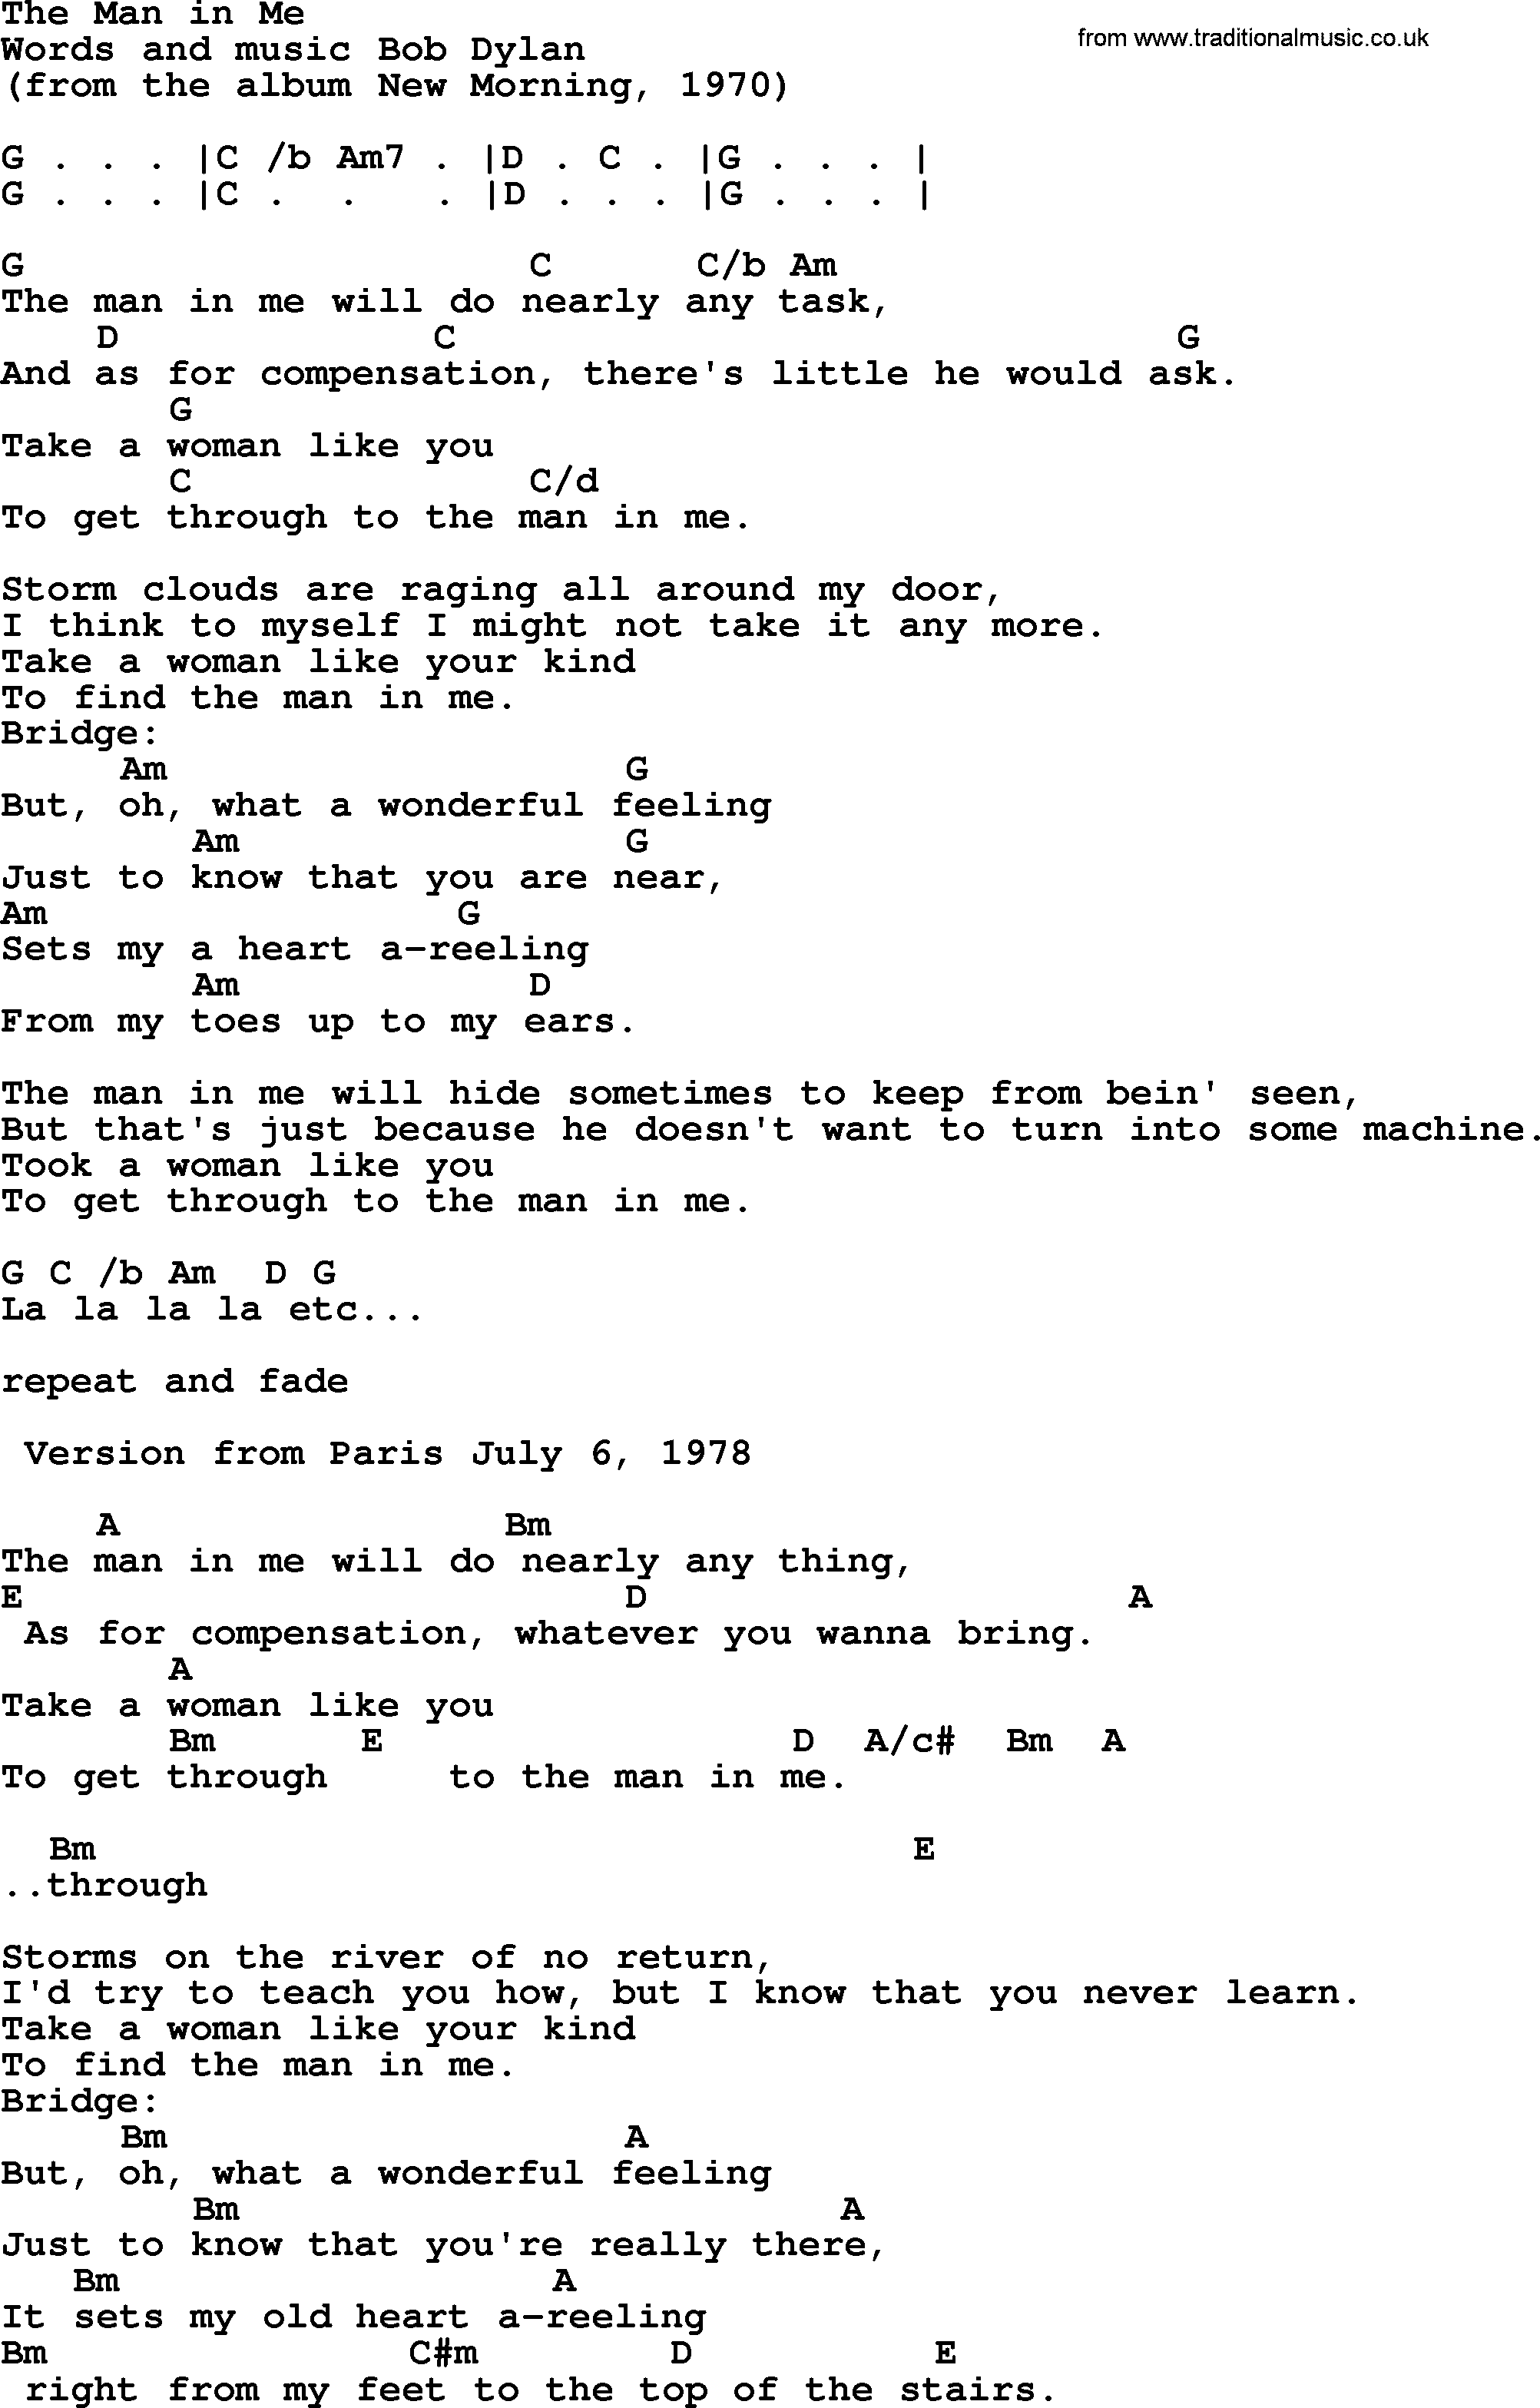 Bob Dylan song, lyrics with chords - The Man in Me